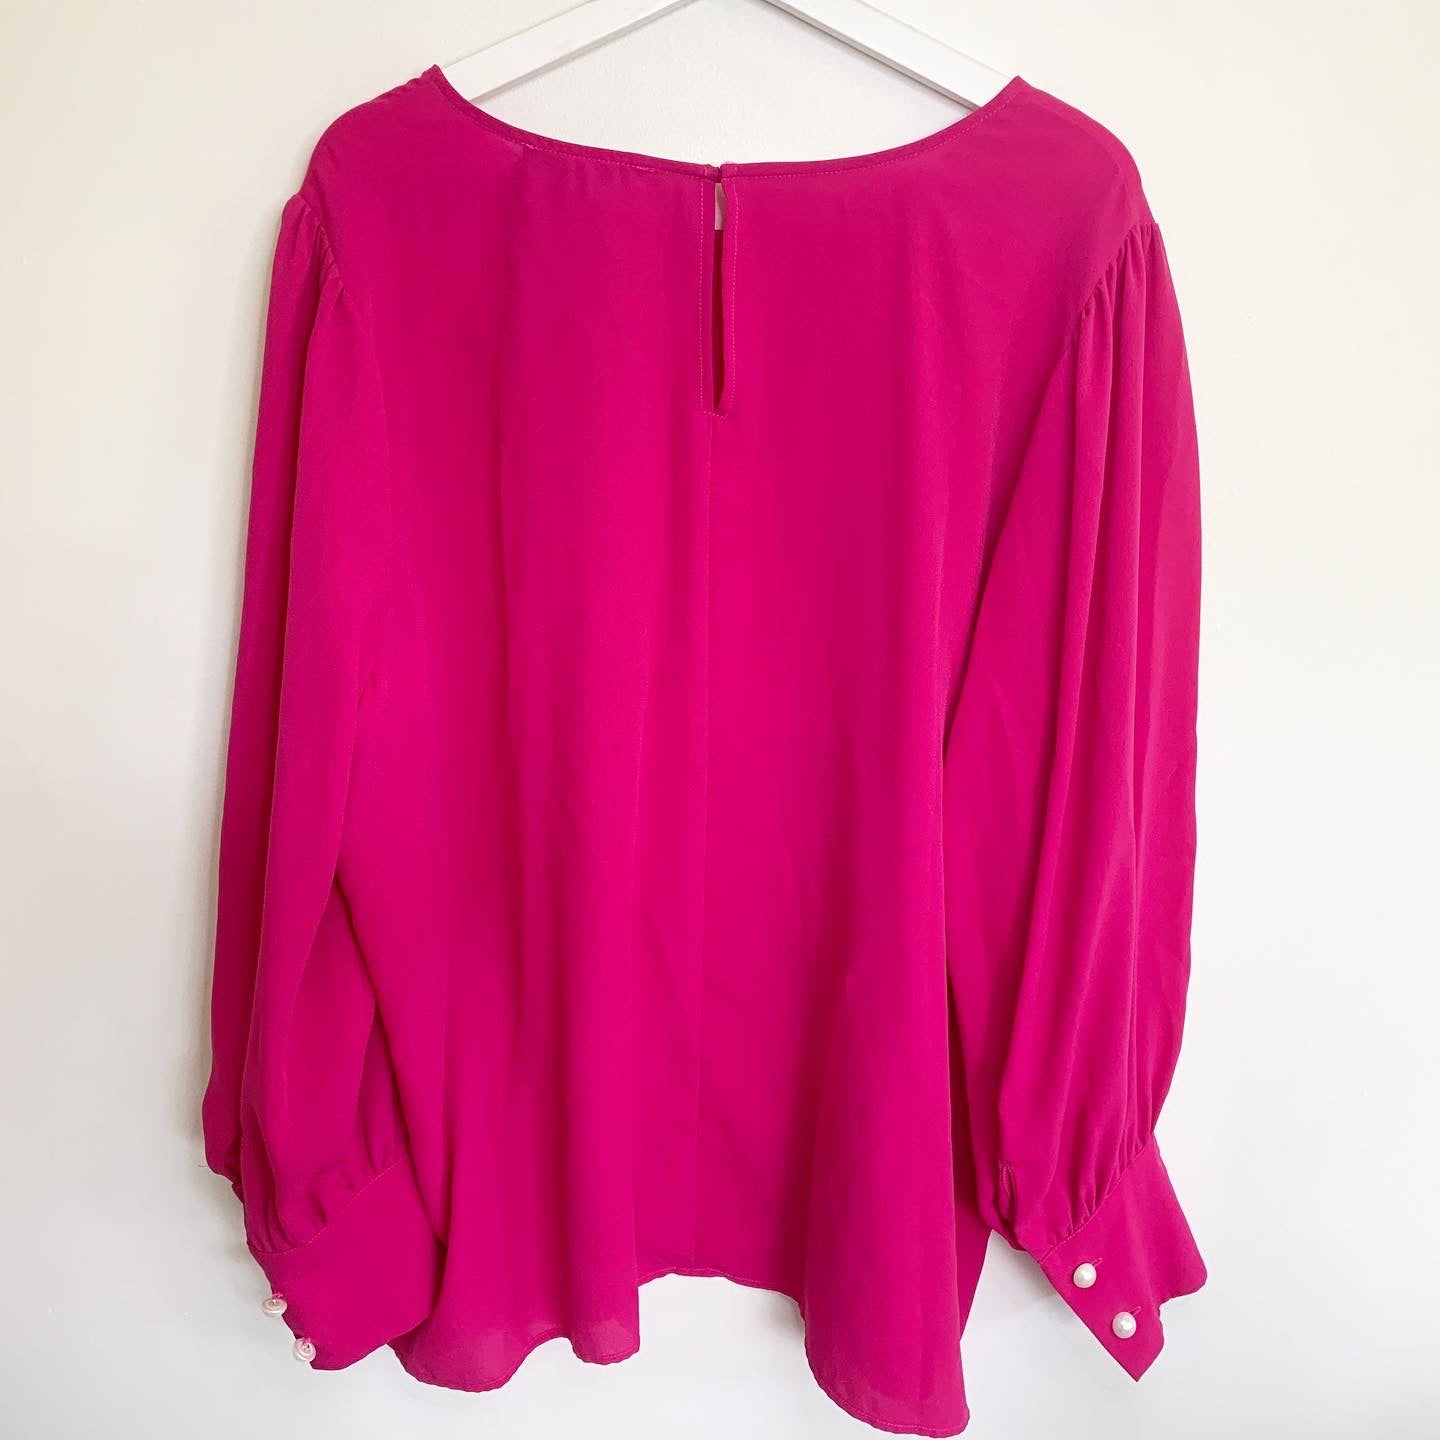 Eloquii Pink Puff Sleeve Top with Pearl Details